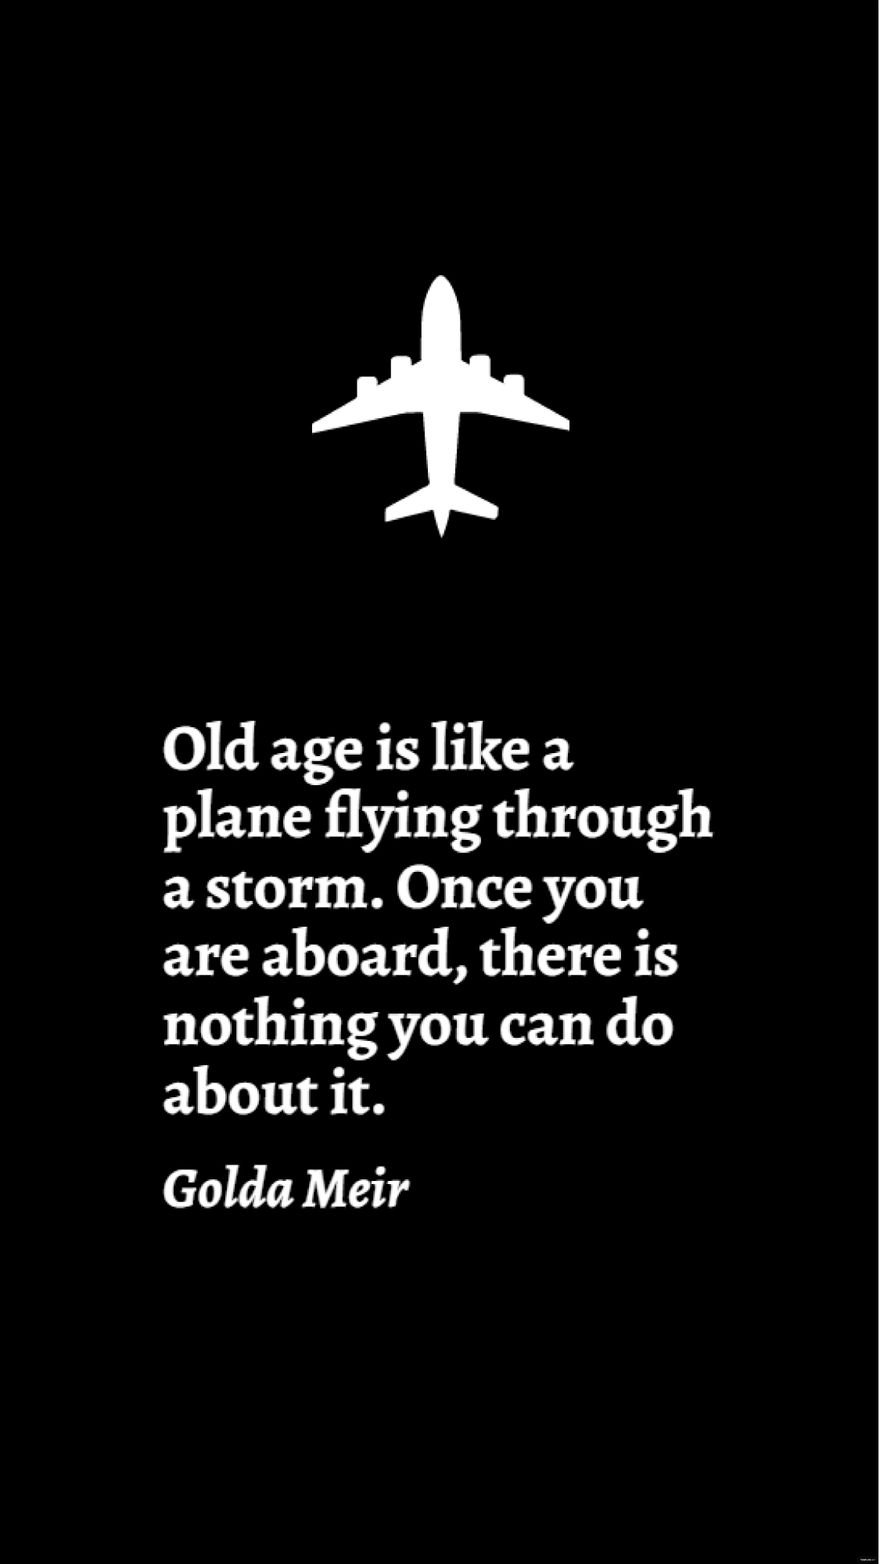 Golda Meir - Old age is like a plane flying through a storm. Once you are aboard, there is nothing you can do about it.